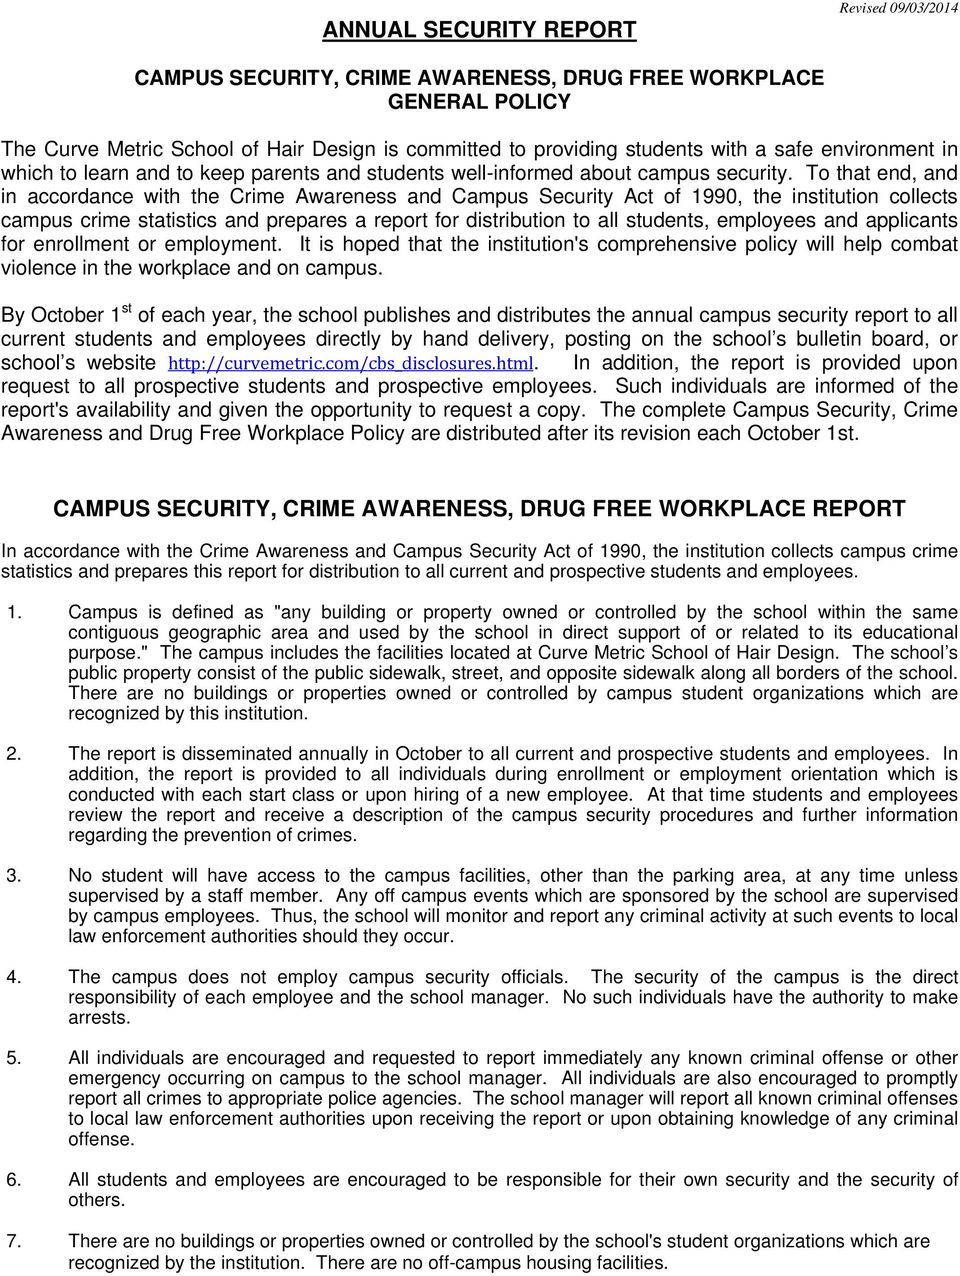 To that end, and in accordance with the Crime Awareness and Campus Security Act of 1990, the institution collects campus crime statistics and prepares a report for distribution to all students,